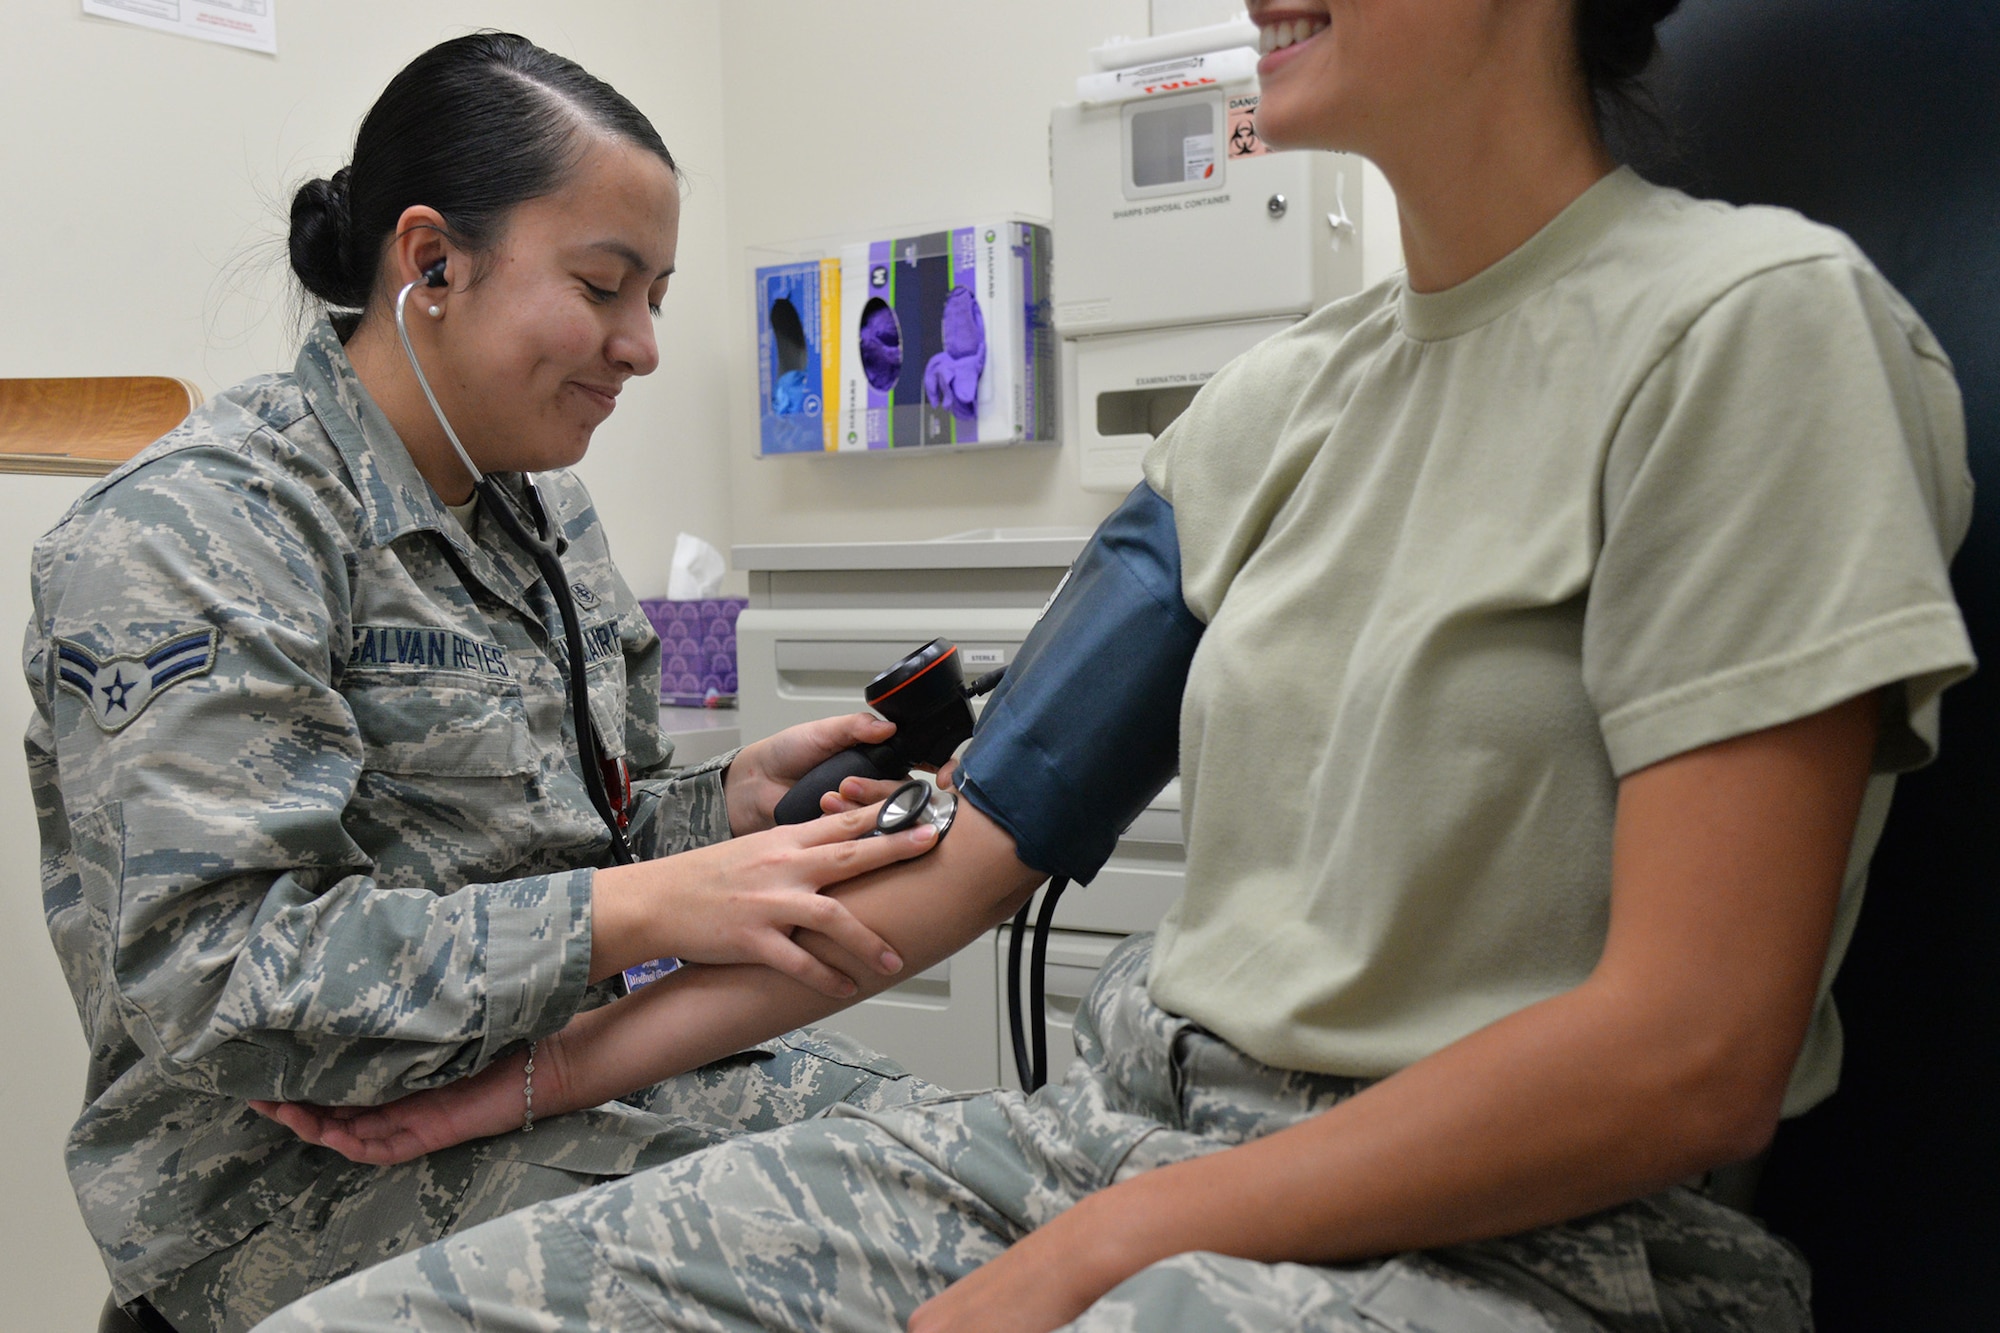 Airman 1st Class Lidya Galvan Reyes, 341st Medical Operations Squadron medical technician, checks the blood pressure of an Airman Nov. 27, 2017, at Malmstrom Air Force Base, Mont.